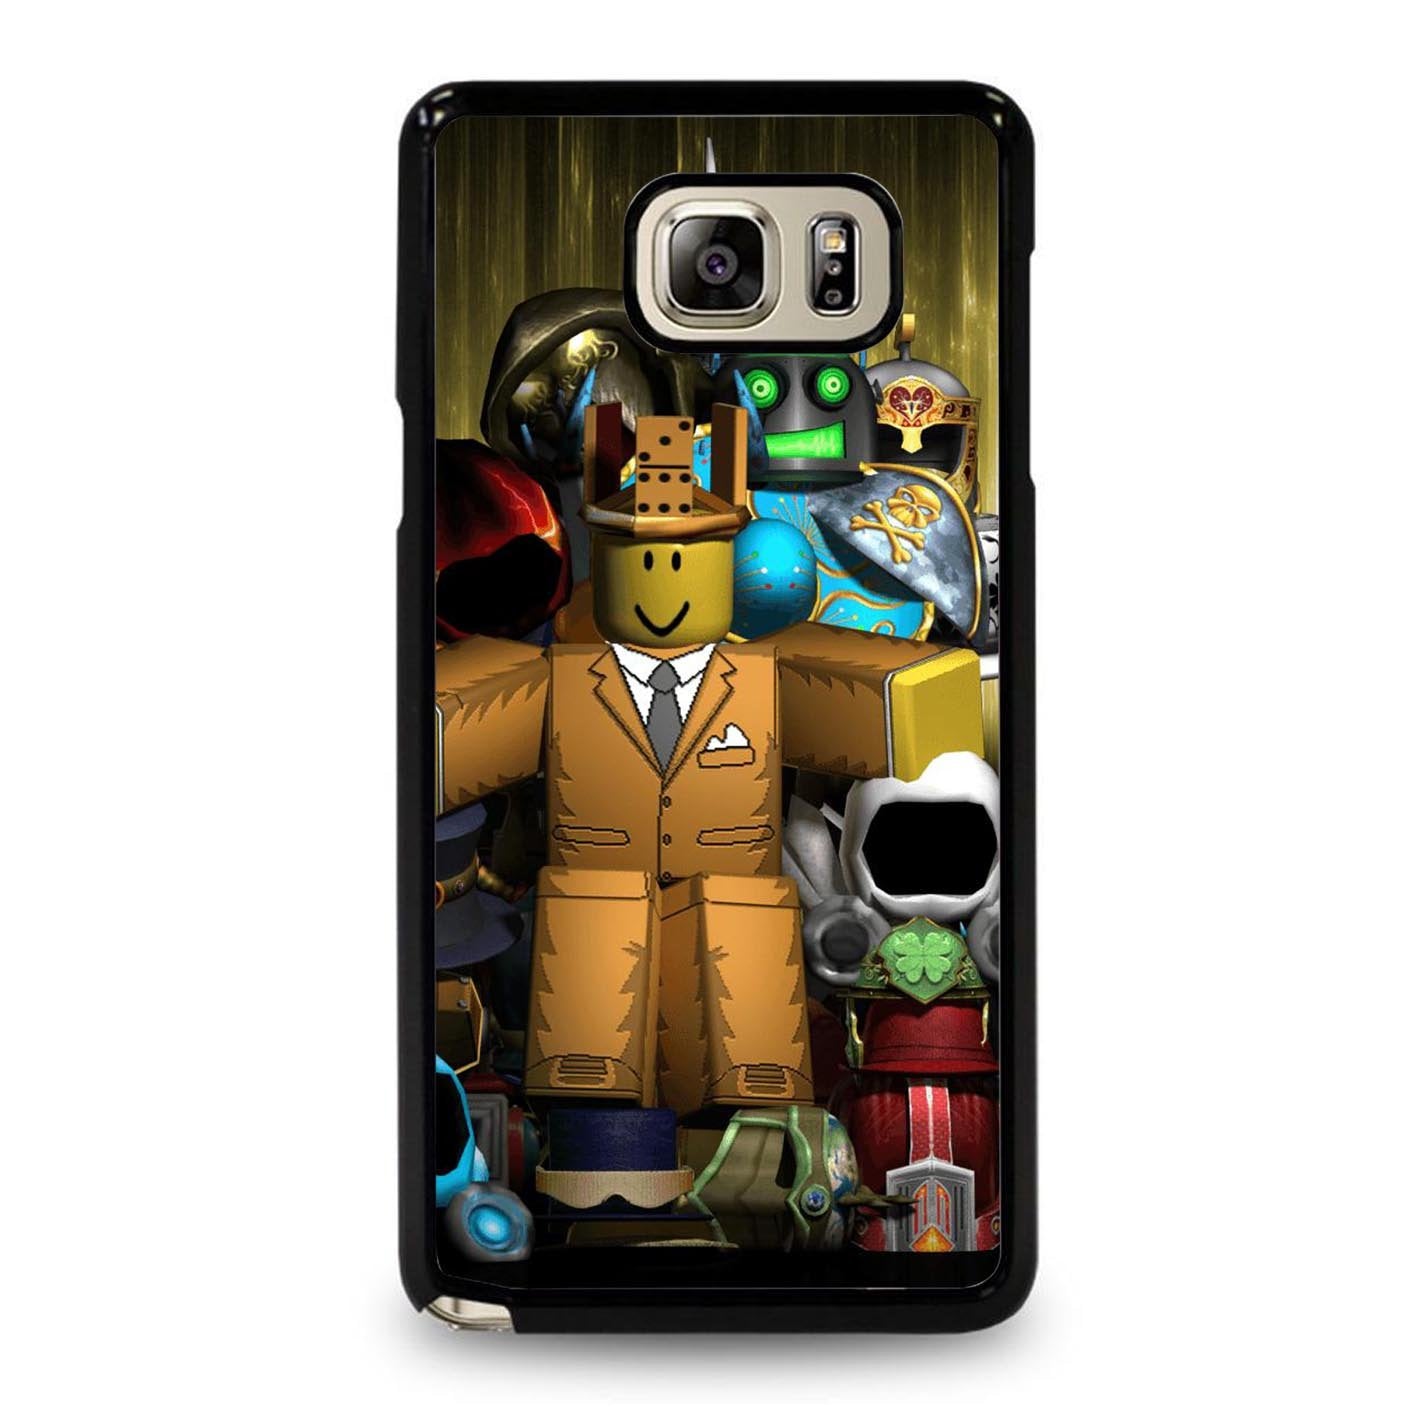 Roblox Artwork 03 Samsung Galaxy Note 5 Case Cover Iphone And Android Teecustom - roblox like a g6